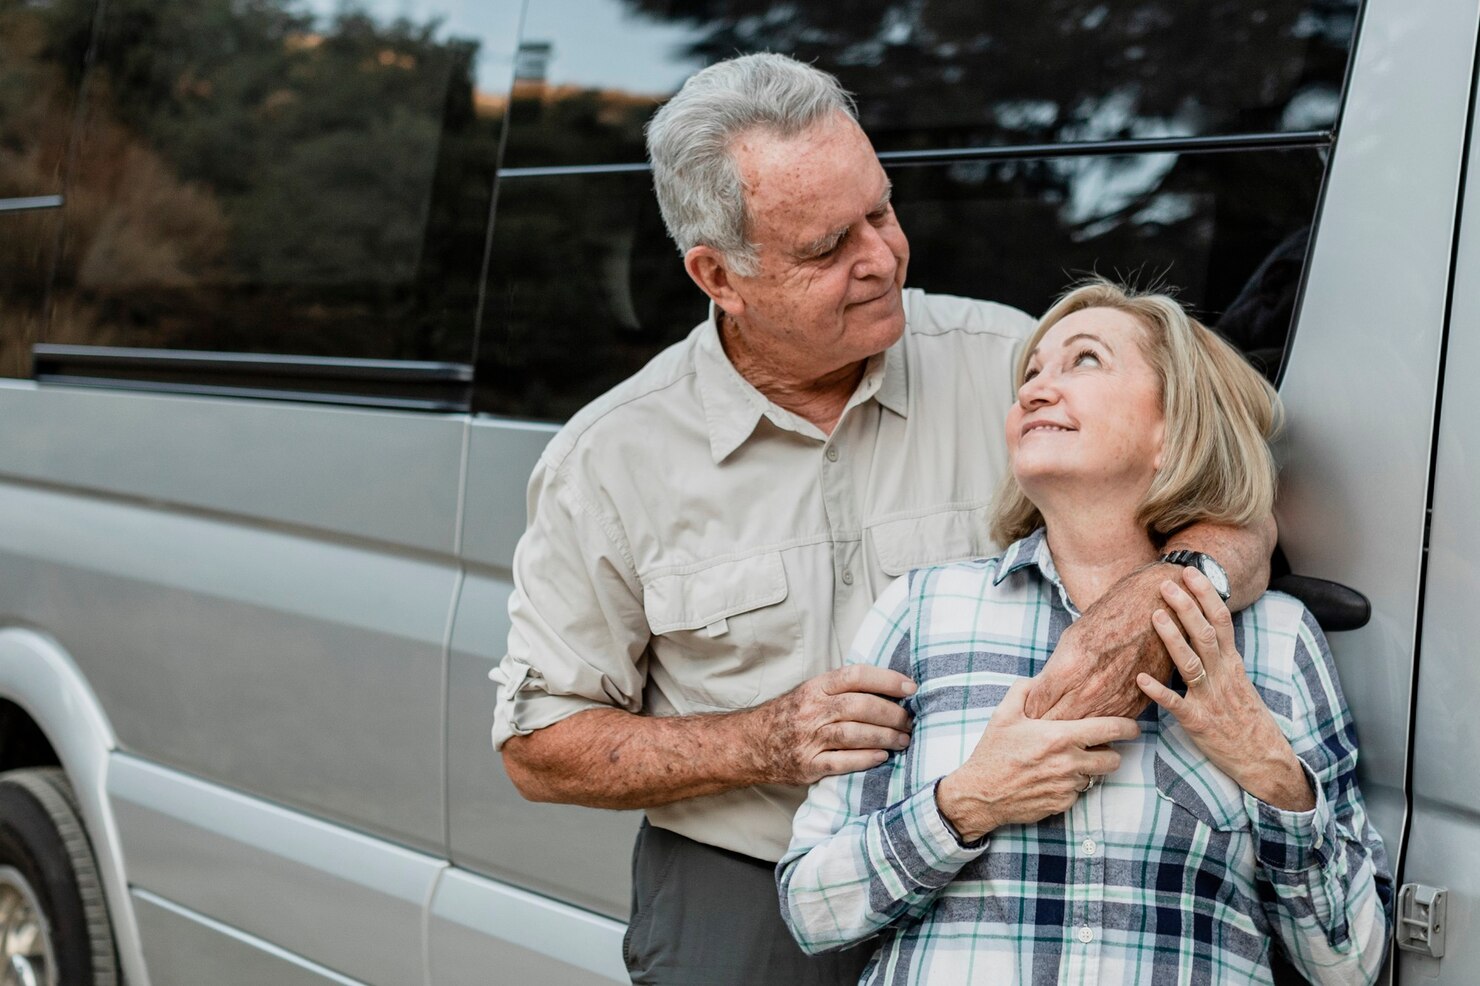 Steer Your Senior Toward Safety With These Tips During Older Driver Safety Awareness Week